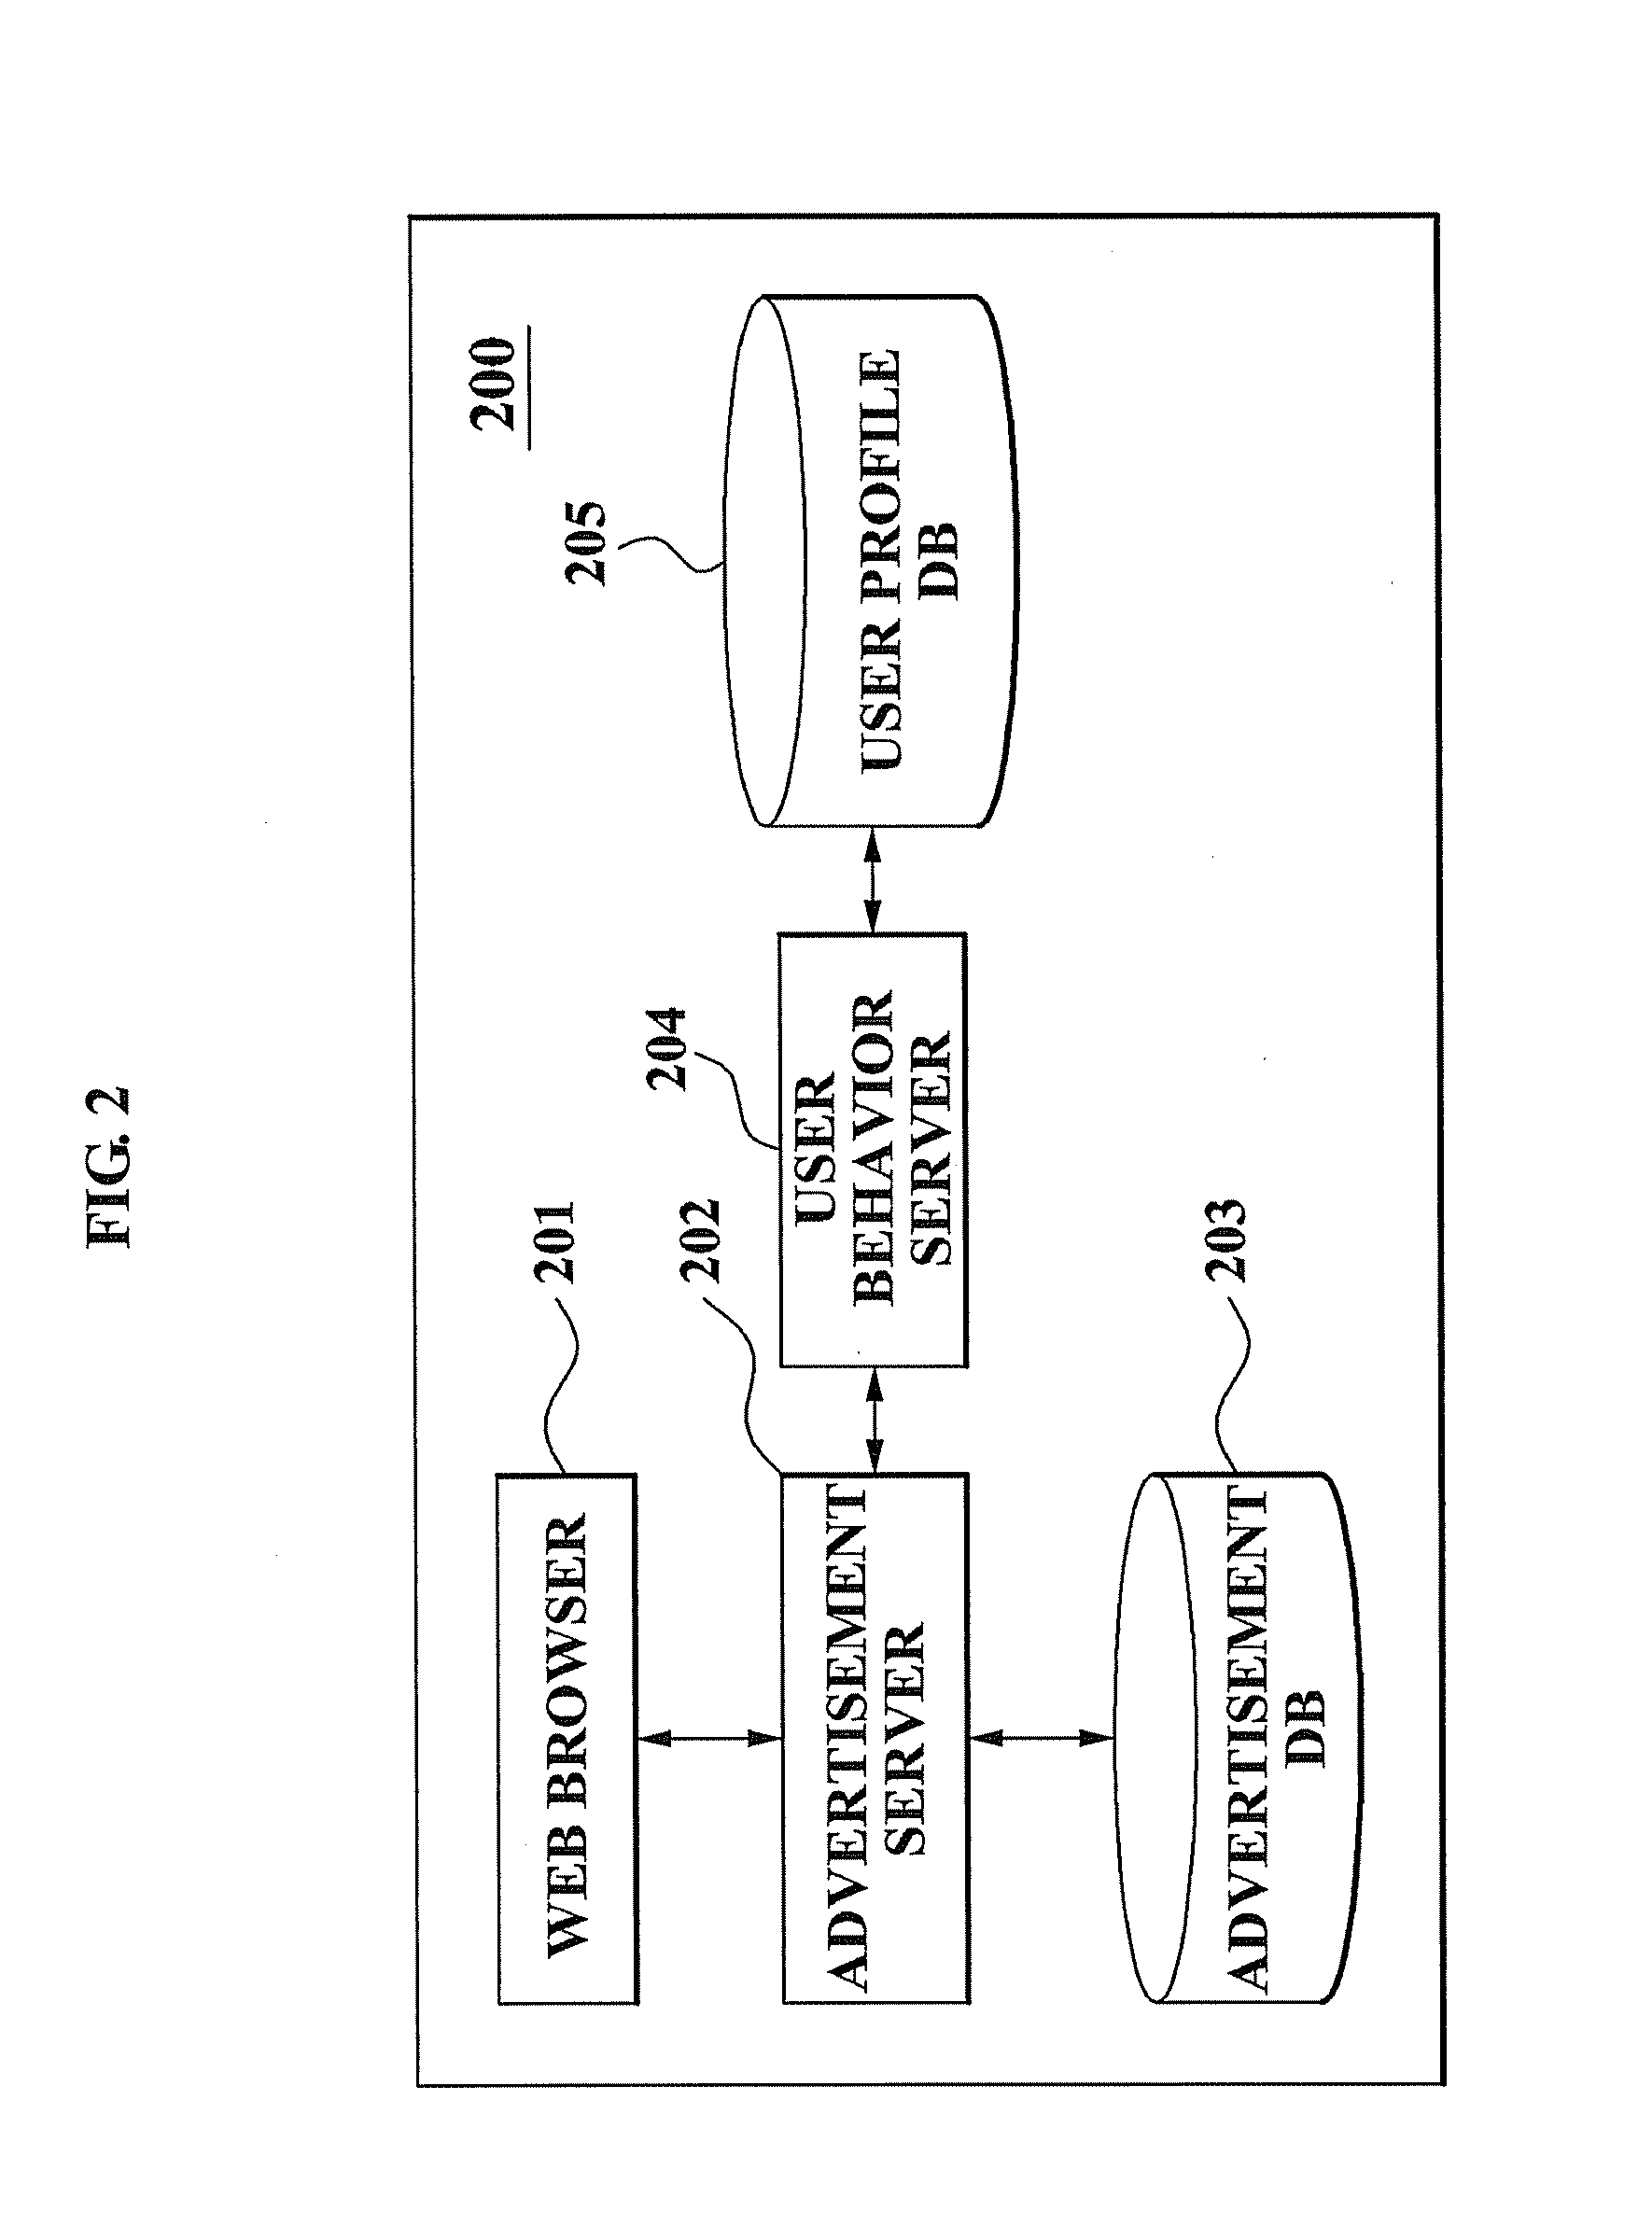 System and method for expanding target inventory according to browser-login mapping